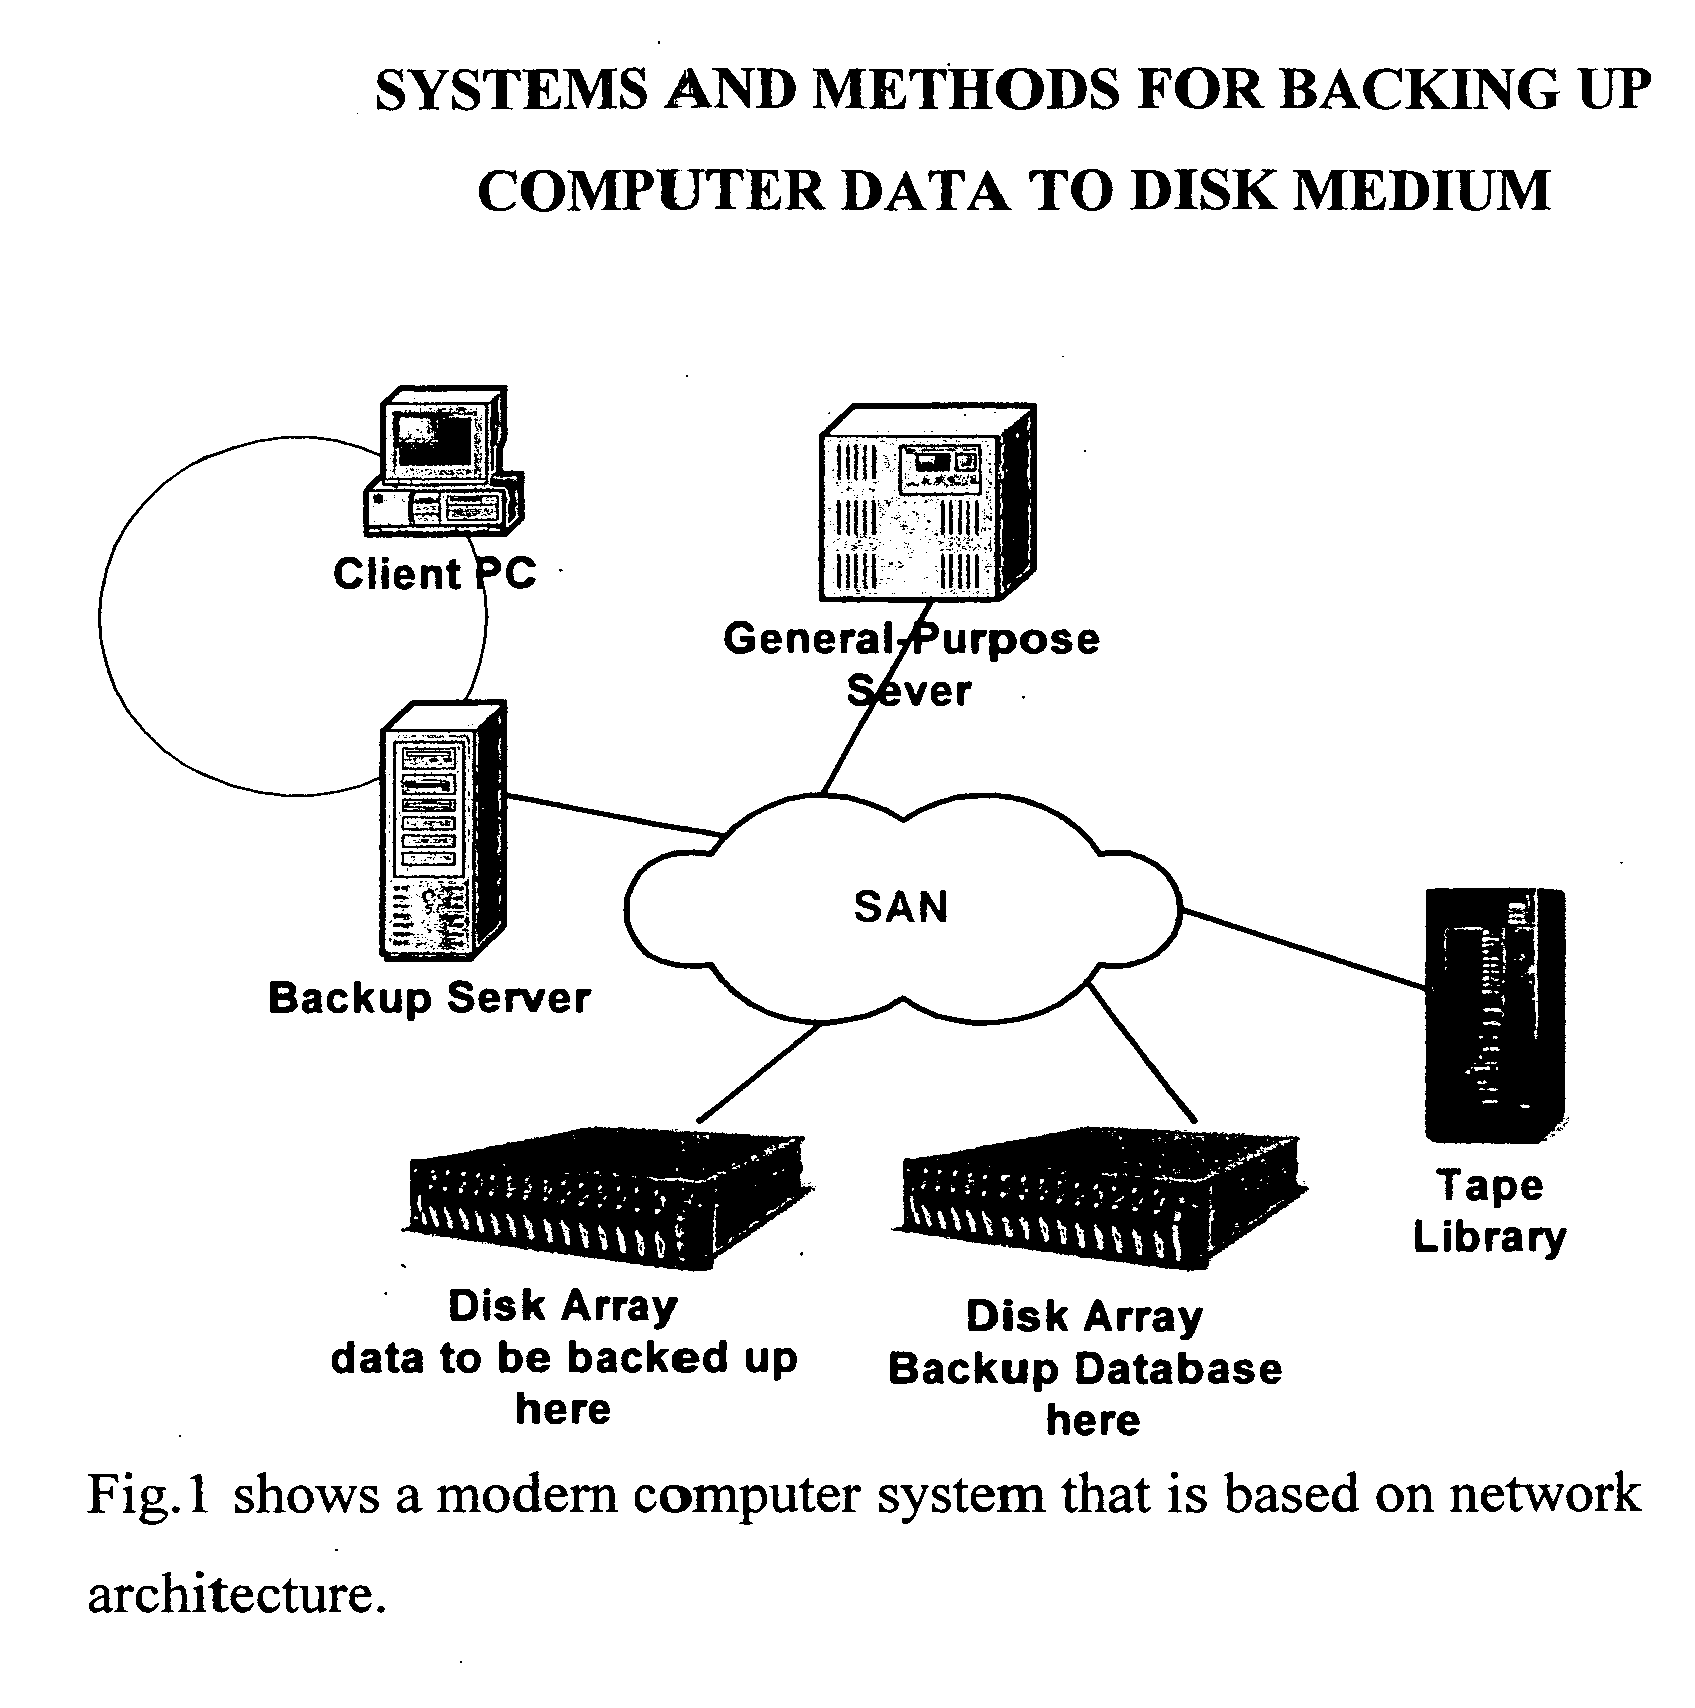 Systems and methods for backing up computer data to disk medium